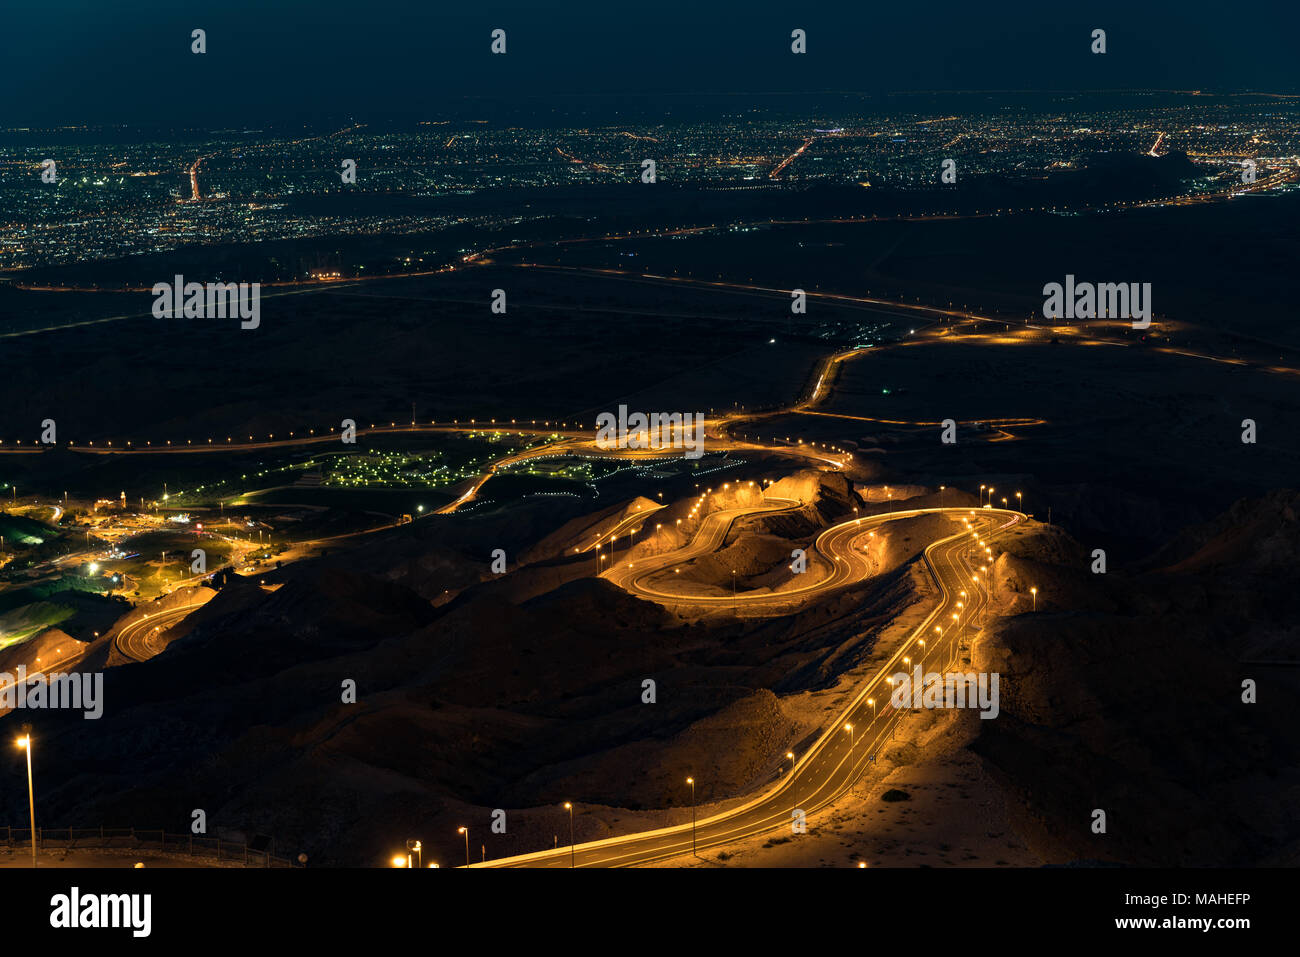 View to Al Ain from the top of Jebel Hafeet mountain. Just after sunset. Stock Photo